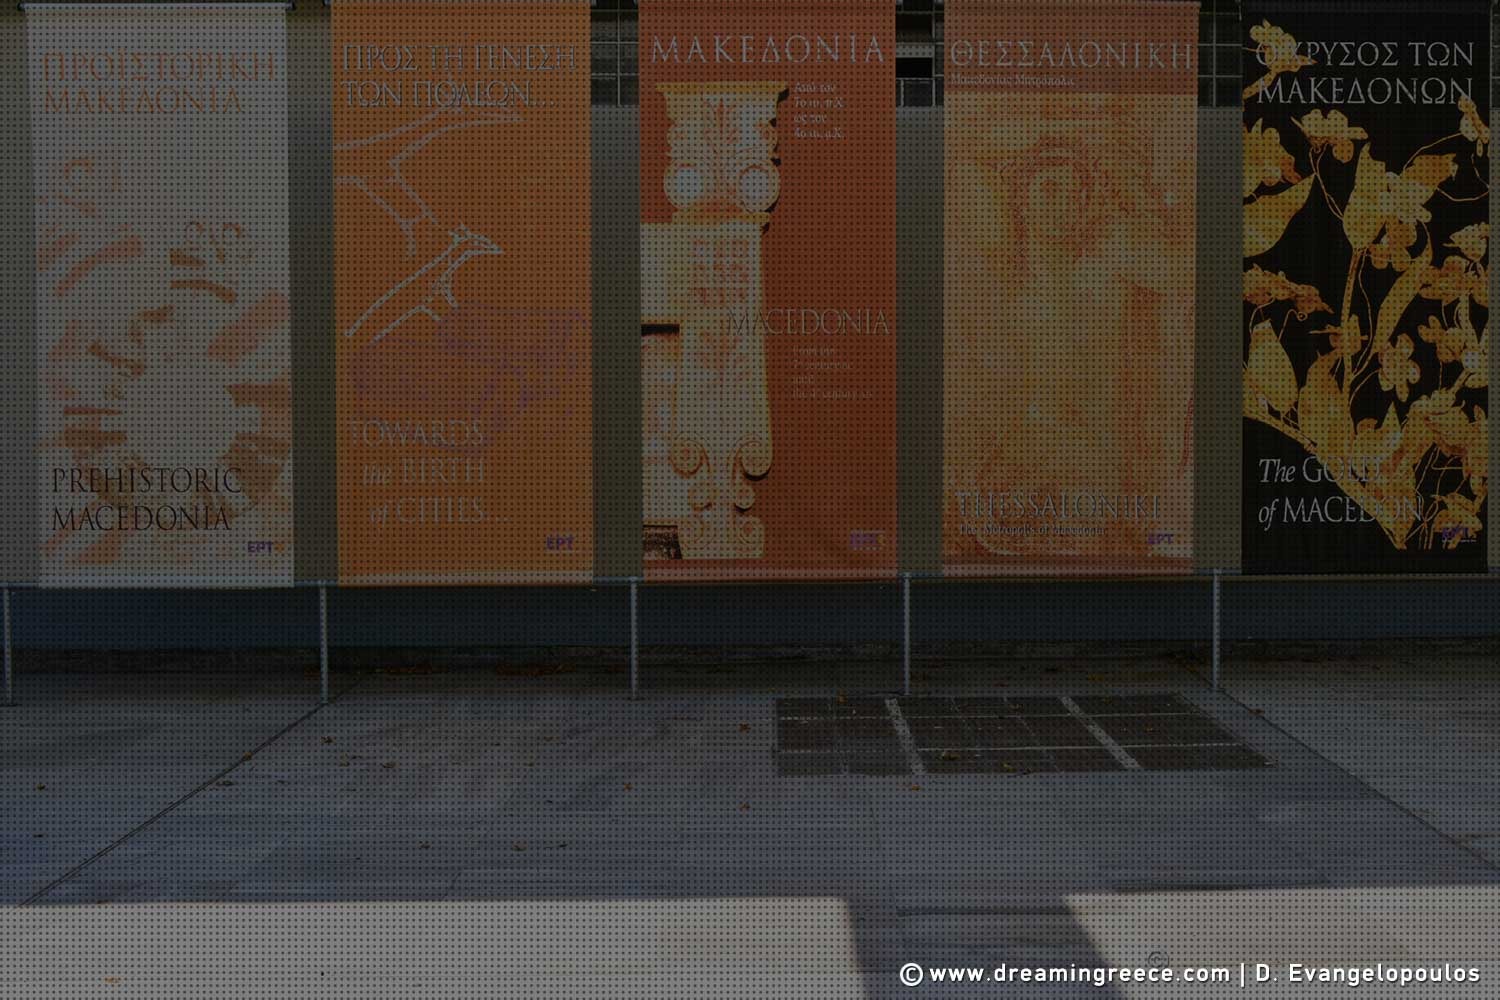 Archaeological Museum of Thessaloniki. Museums in Greece